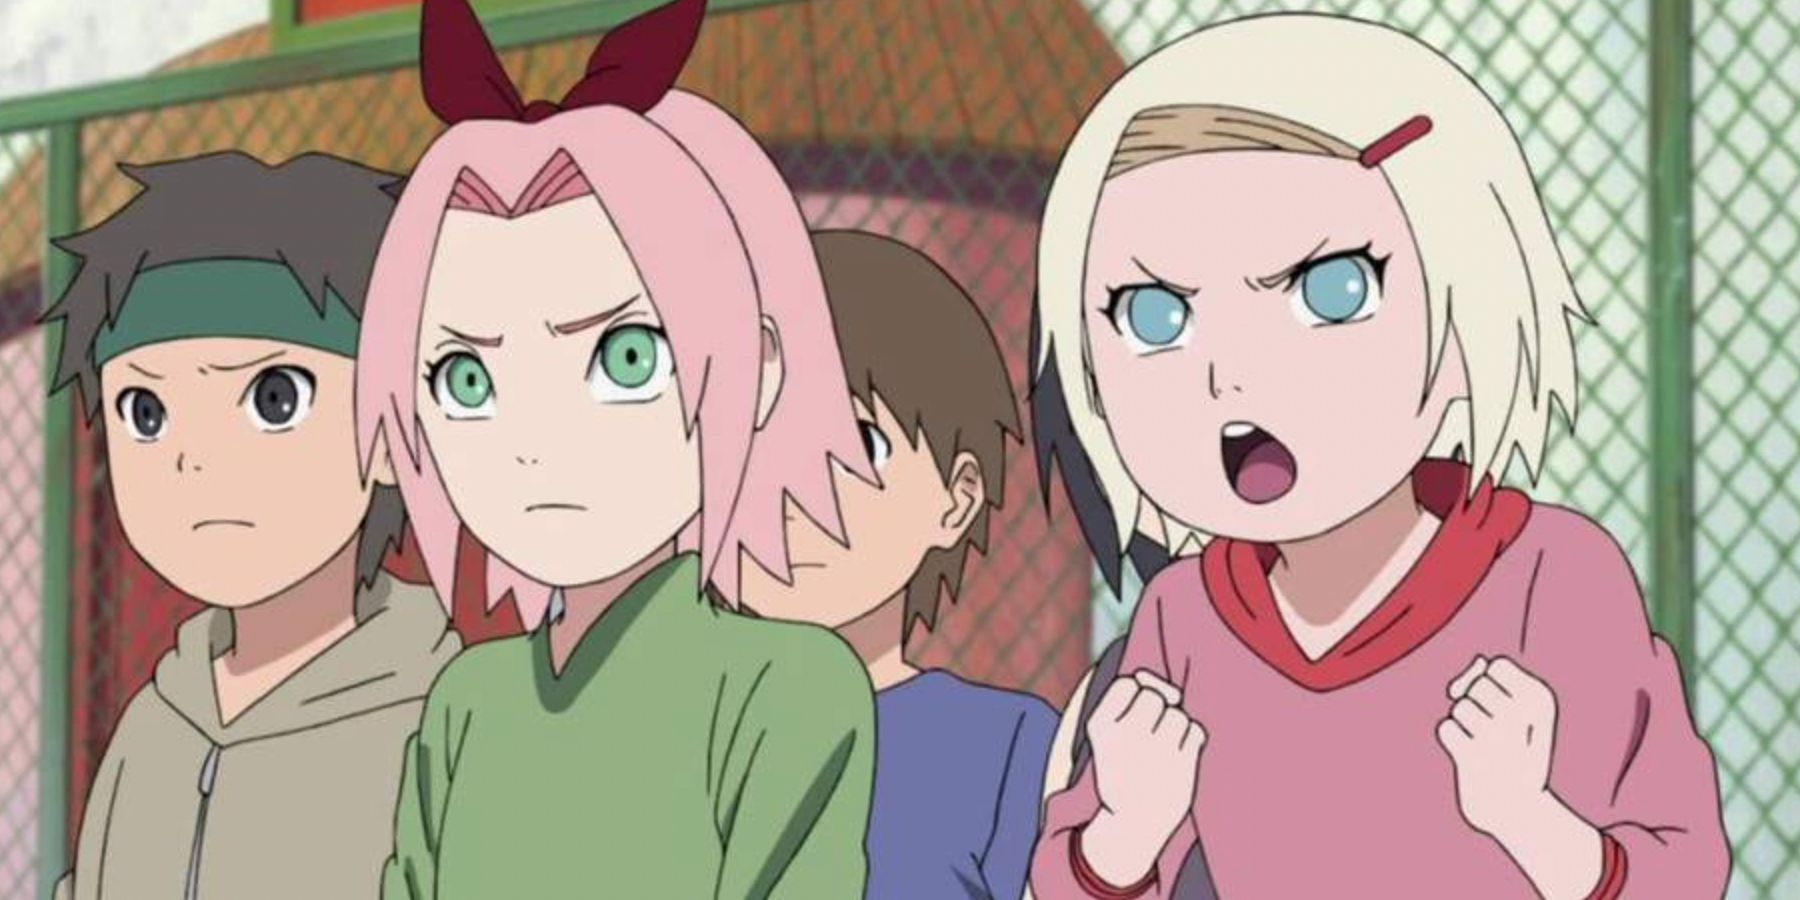 A young Sakura and Ino stand together during a Naruto flashback